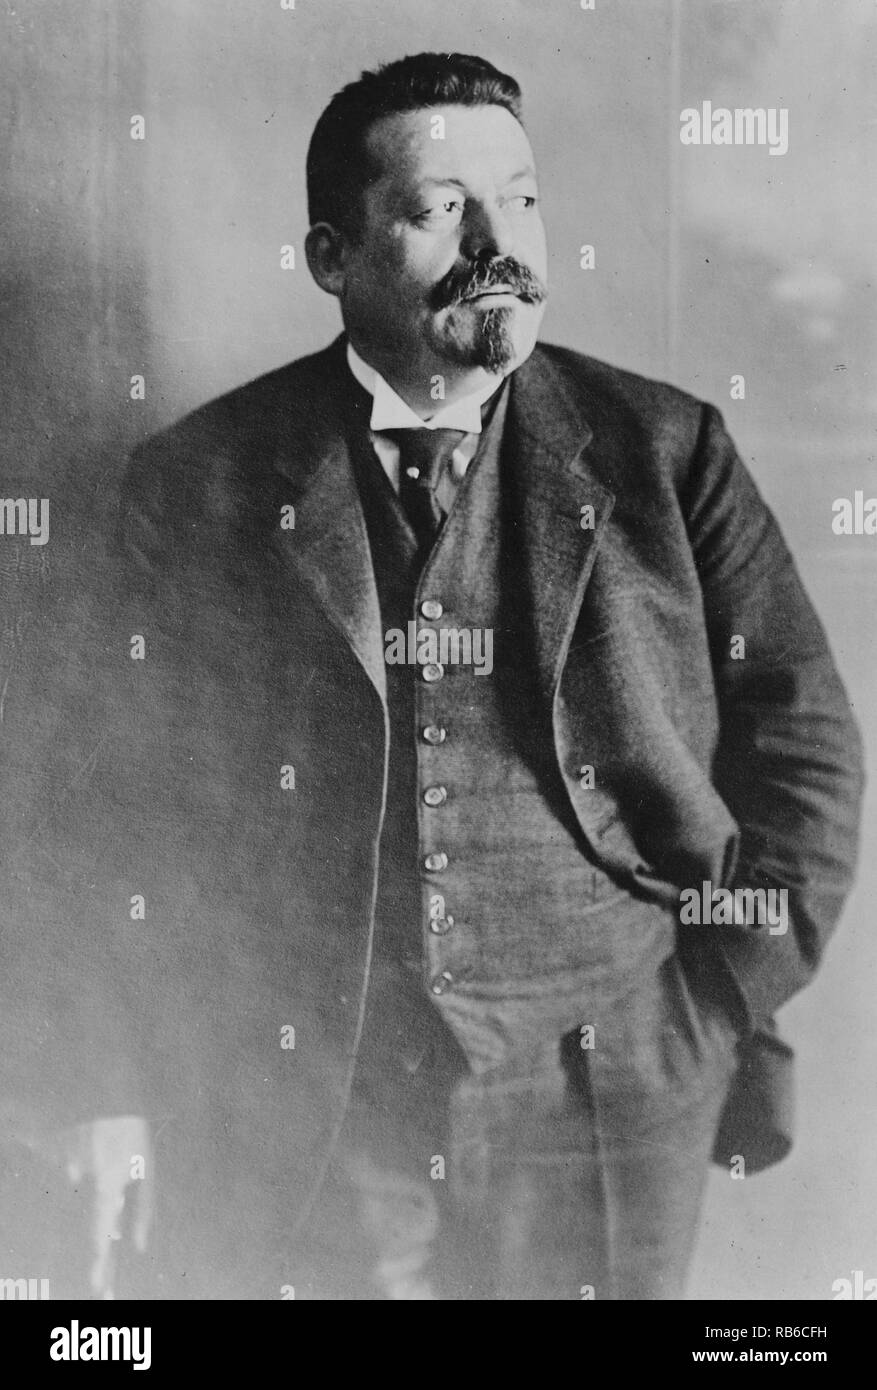 Friedrich Ebert (1871 – 1925) German politician of the Social Democratic Party of Germany (SPD) and the first President of Germany from 1919 until 1925. Stock Photo